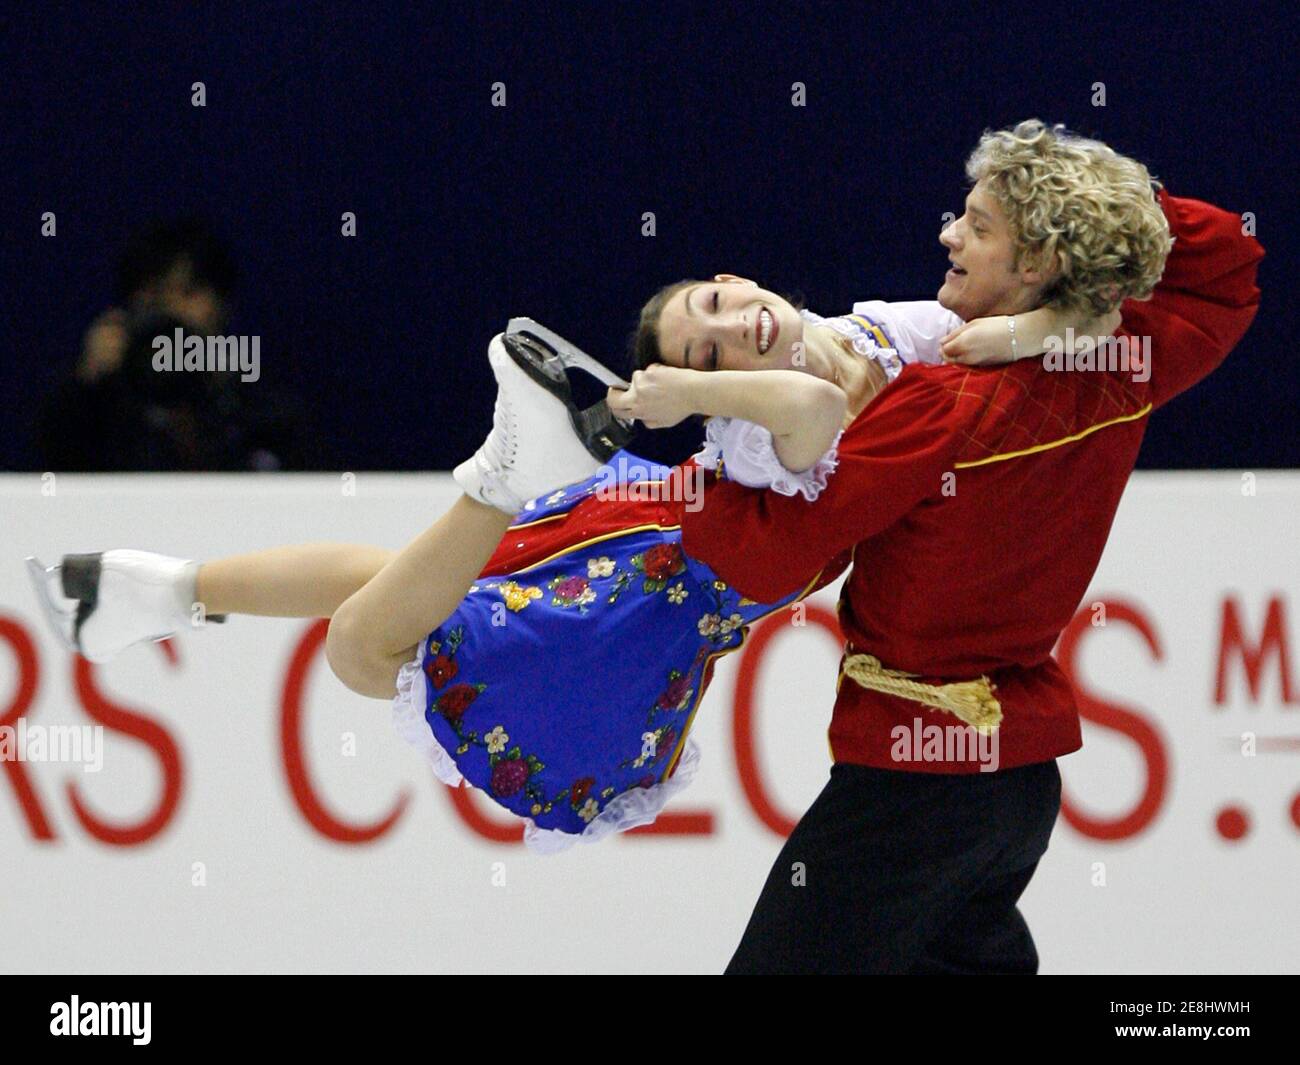 Meryl Davis (L) and Charlie White of the U.S. perform during their ice dancing original dance program at the ISU Four Continents Figure Skating Championships in Goyang, northwest of Seoul, February 14, 2008.  REUTERS/Jo Yong-Hak (SOUTH KOREA) Stock Photo